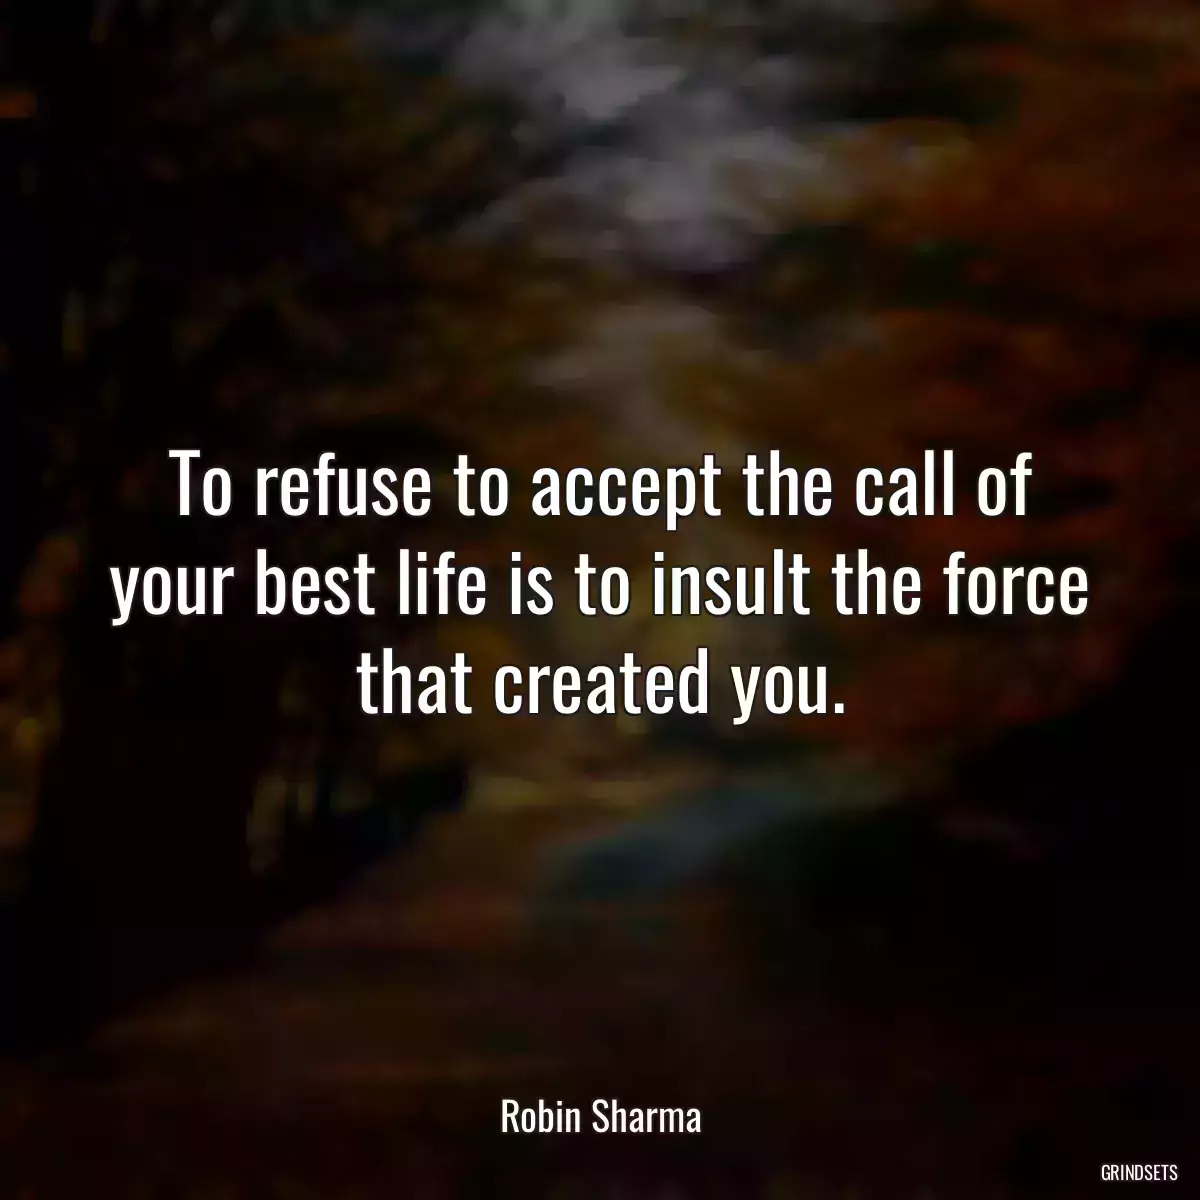 To refuse to accept the call of your best life is to insult the force that created you.